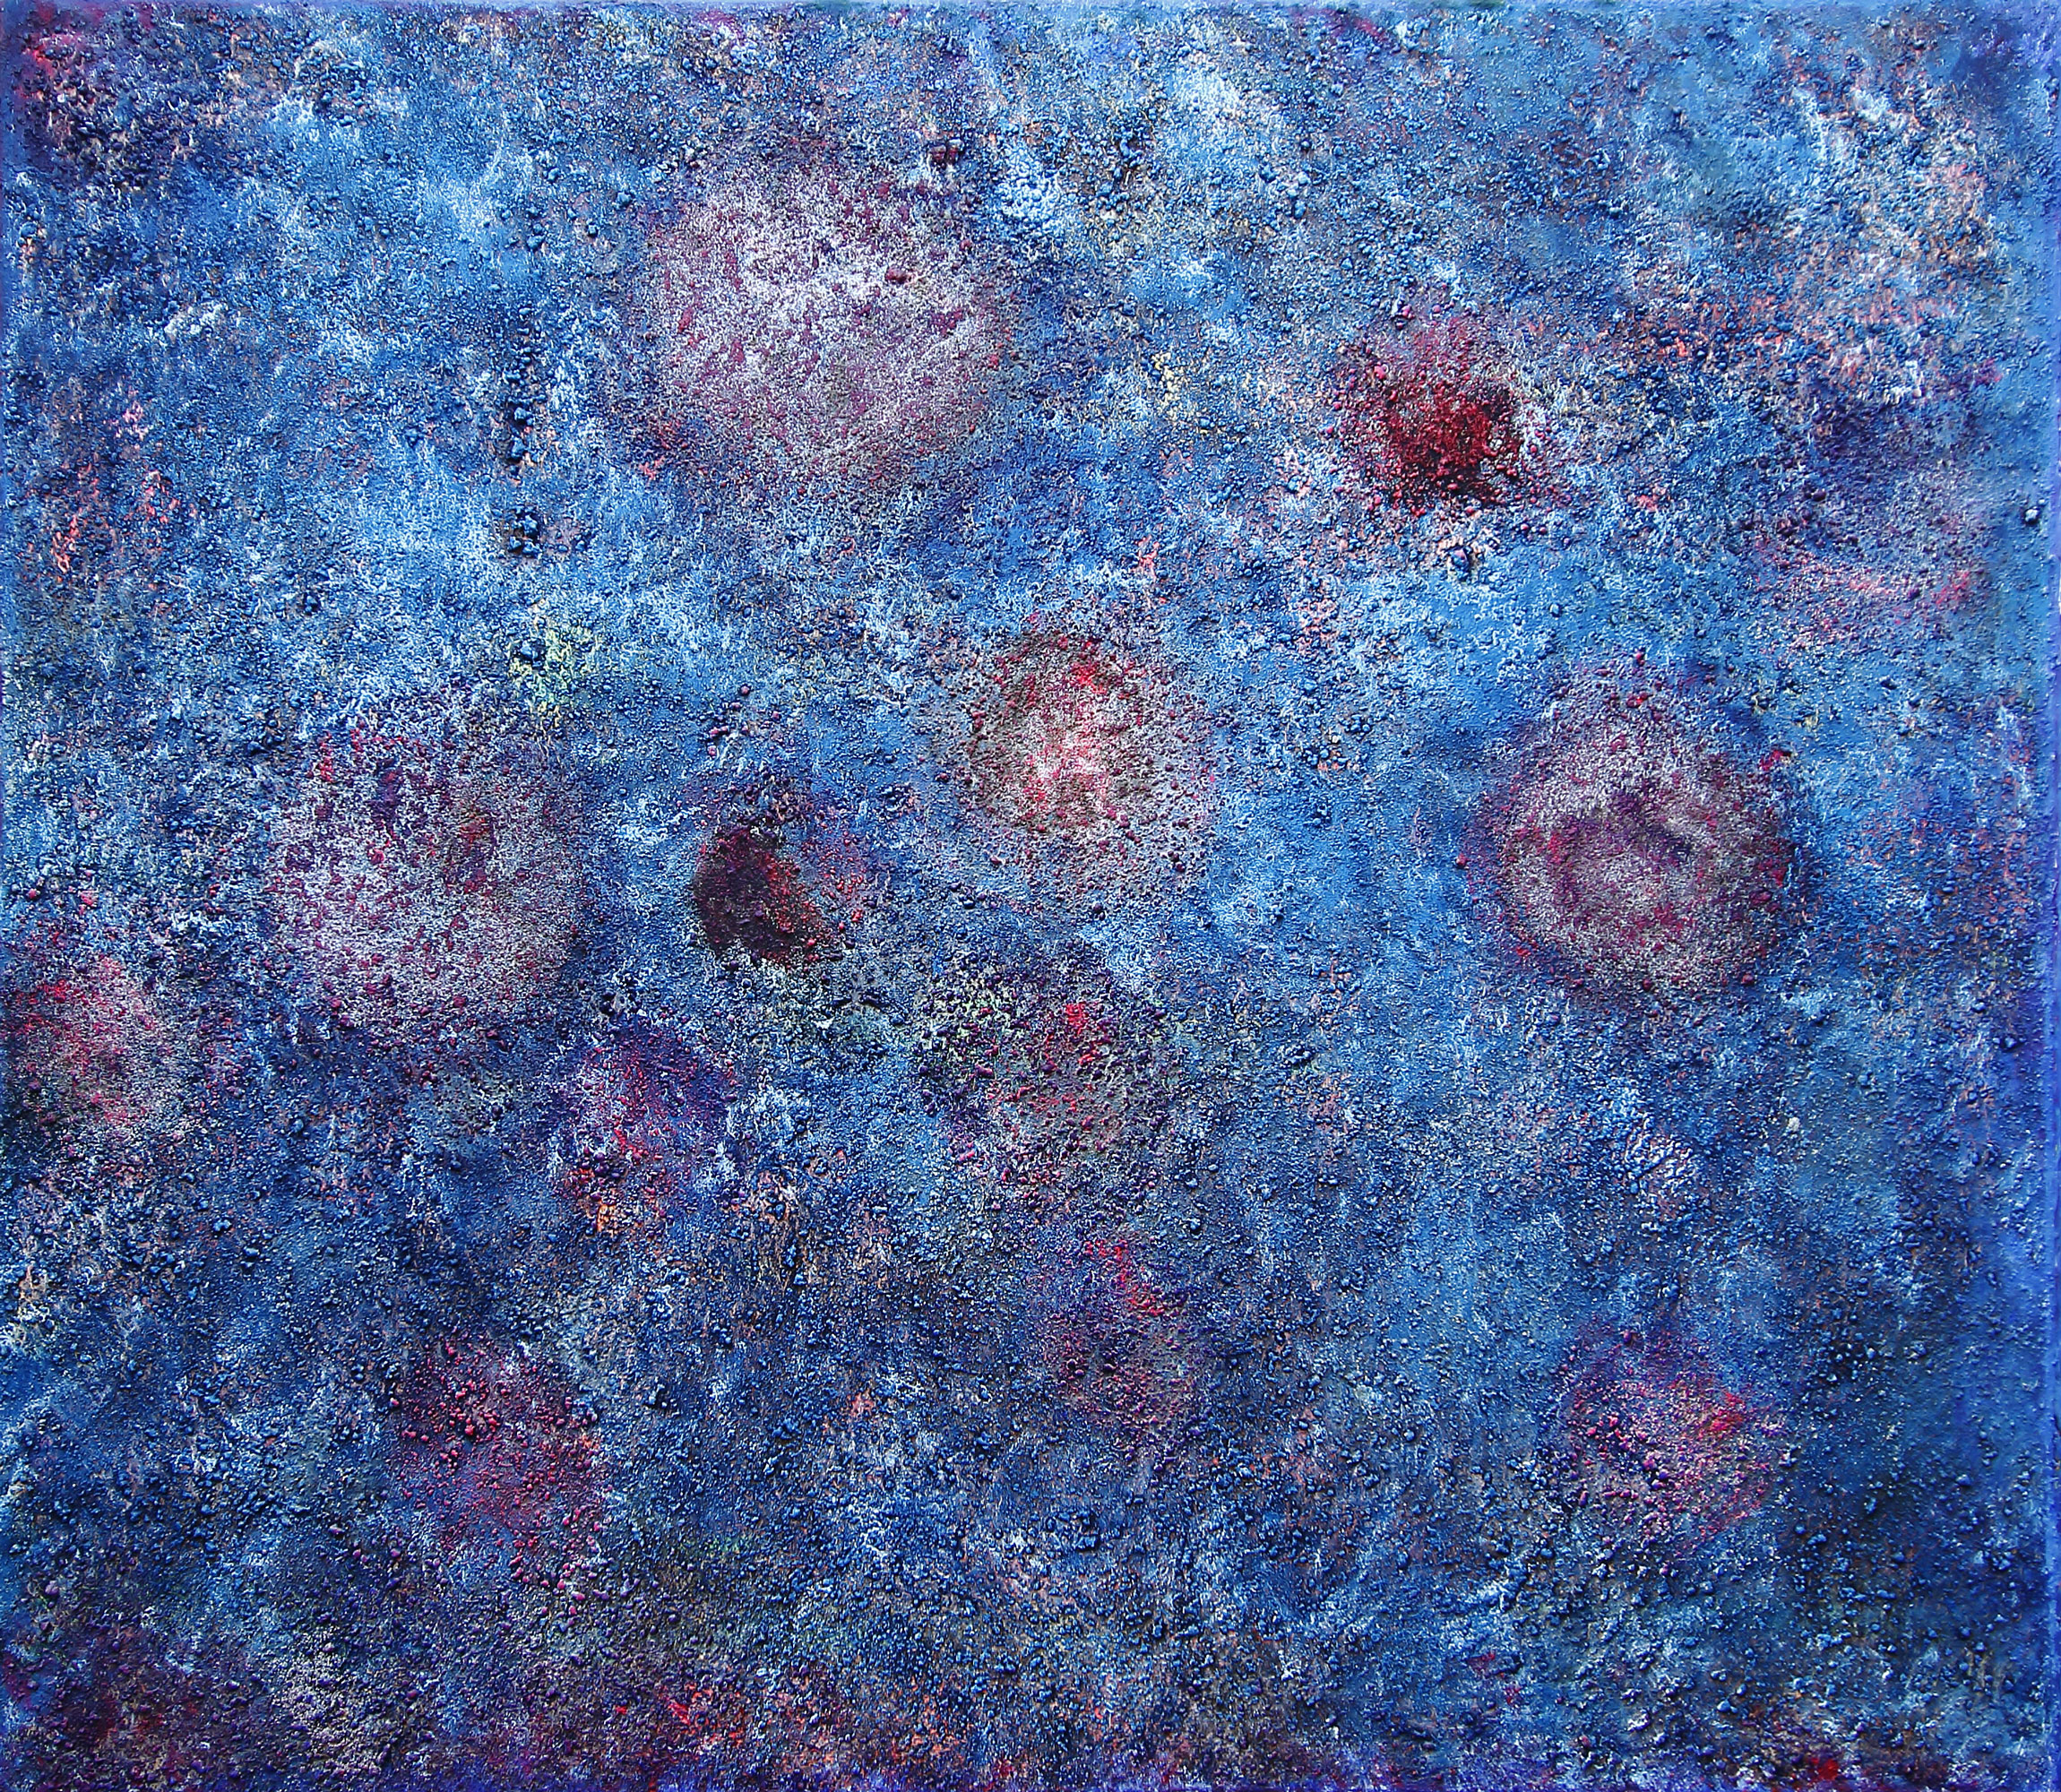 blauer Planet,-blue planet, 2015, 150x160 cm / 59x63 inch (mixed media on canvas)